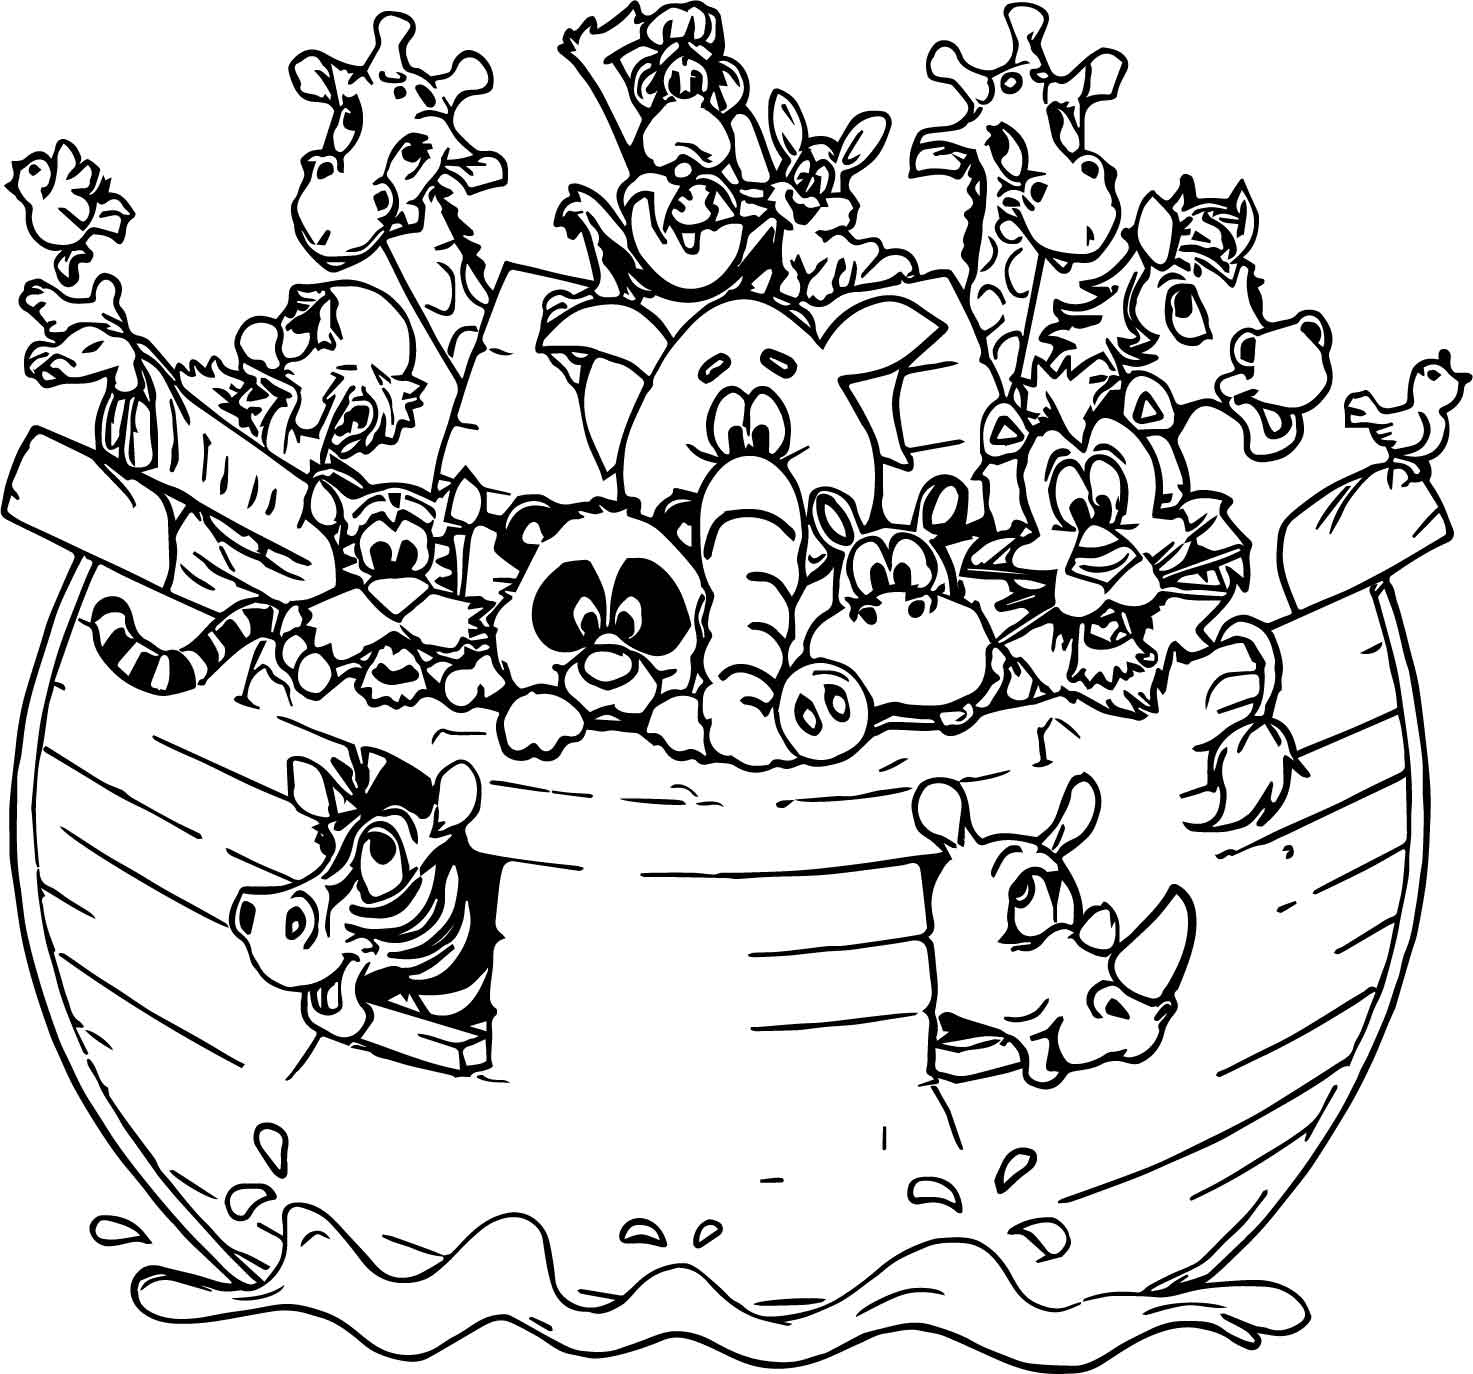 Noah And The Ark Coloring Pages at GetColorings.com | Free ...